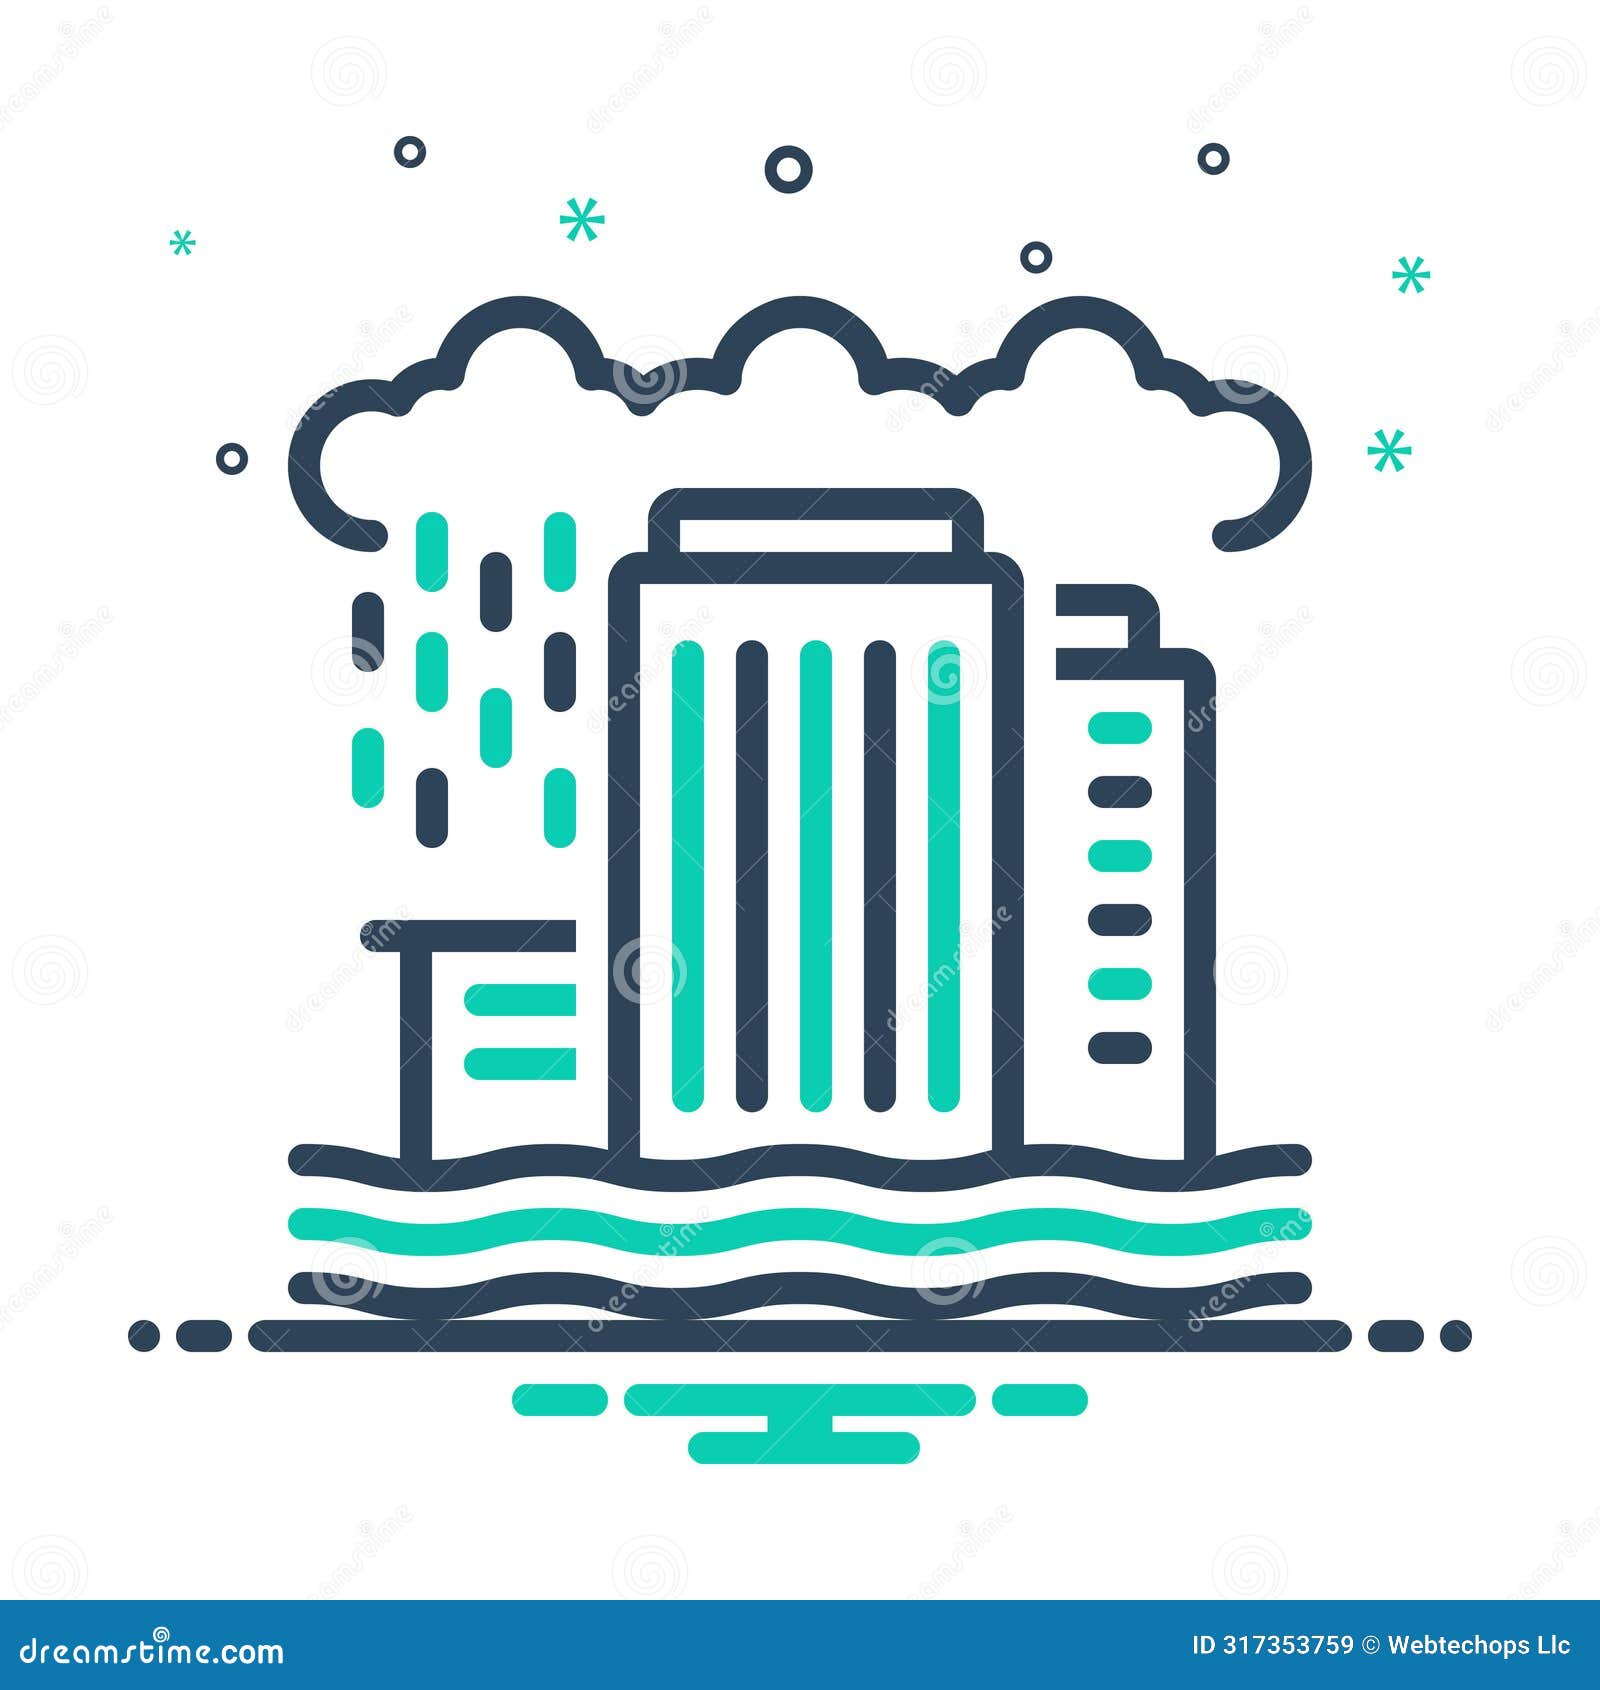 mix icon for flooding, deluge and flood